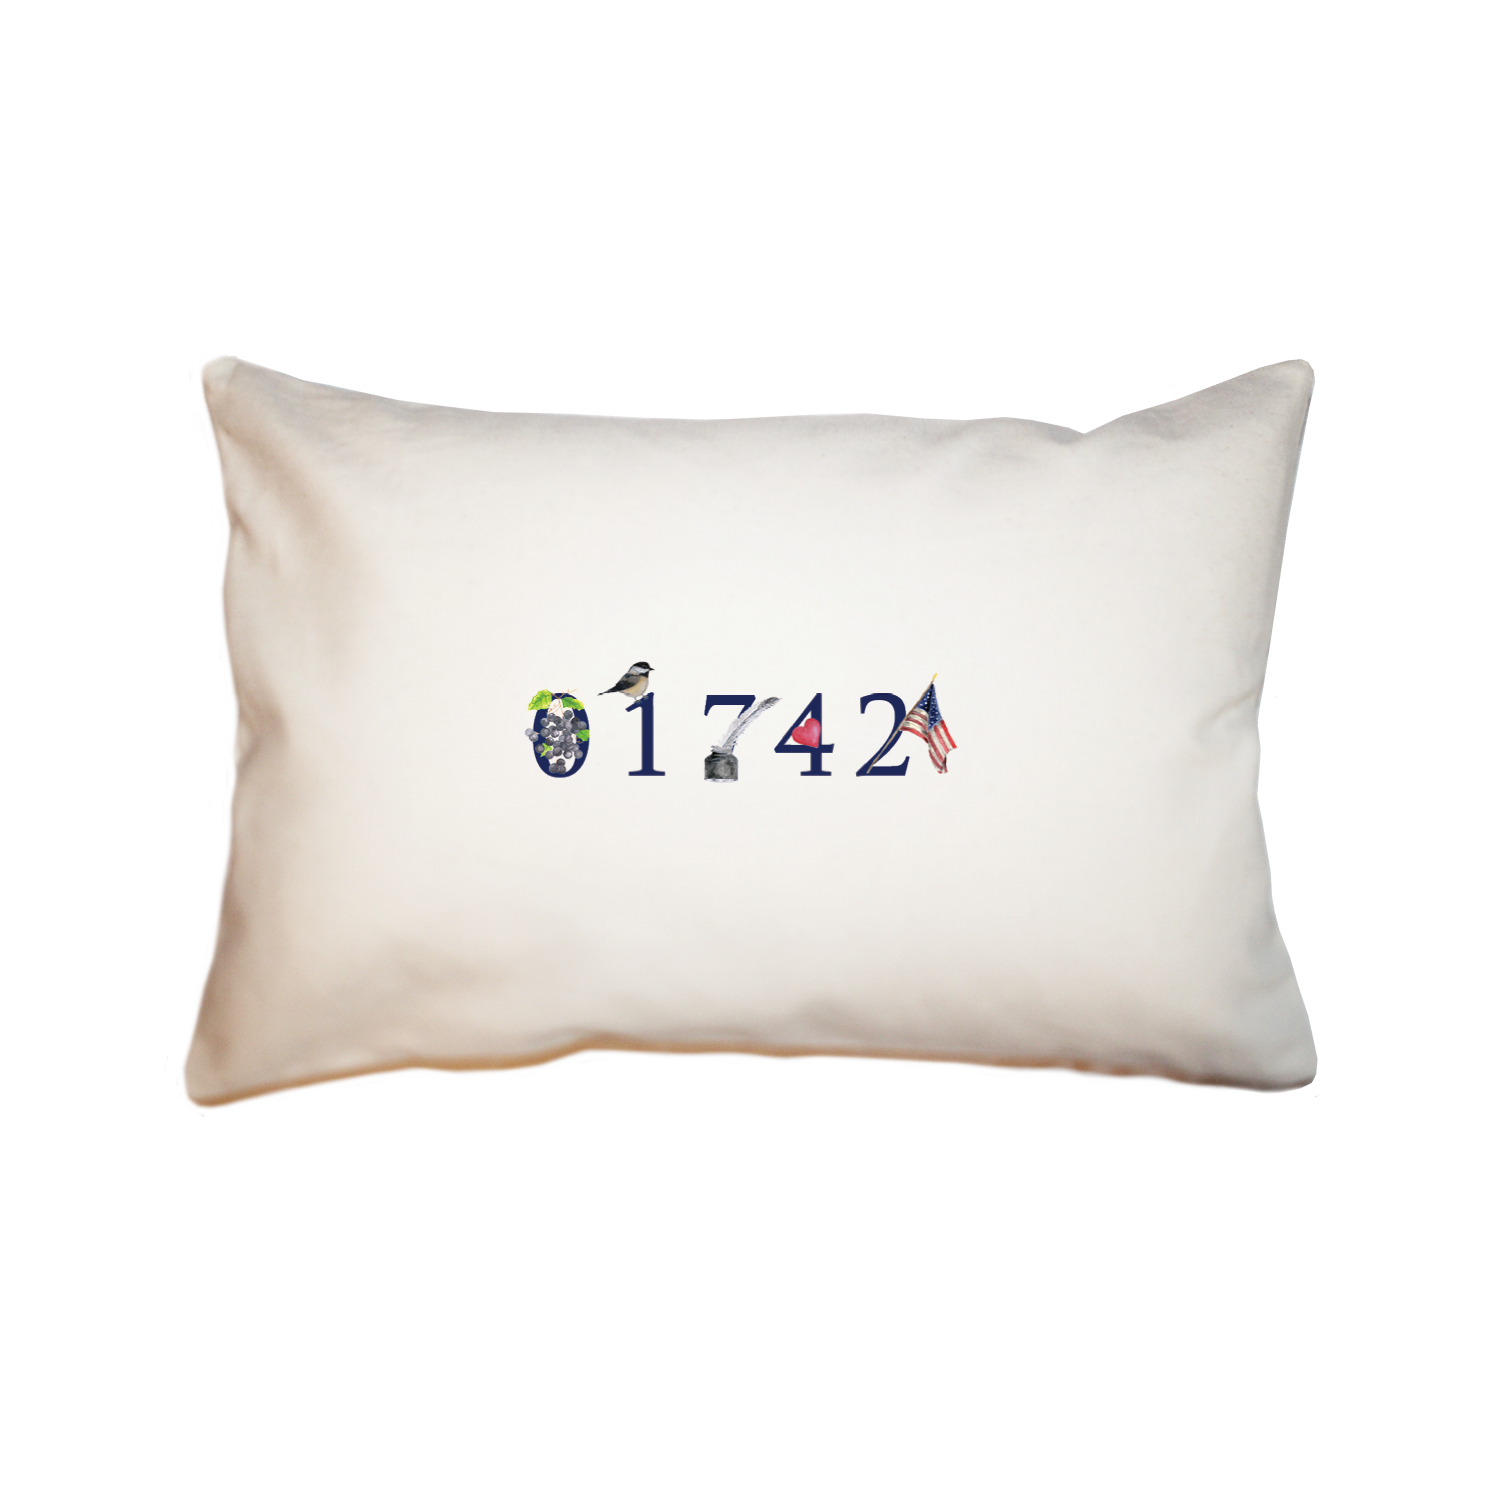 Concord Zip Code large rectangle pillow